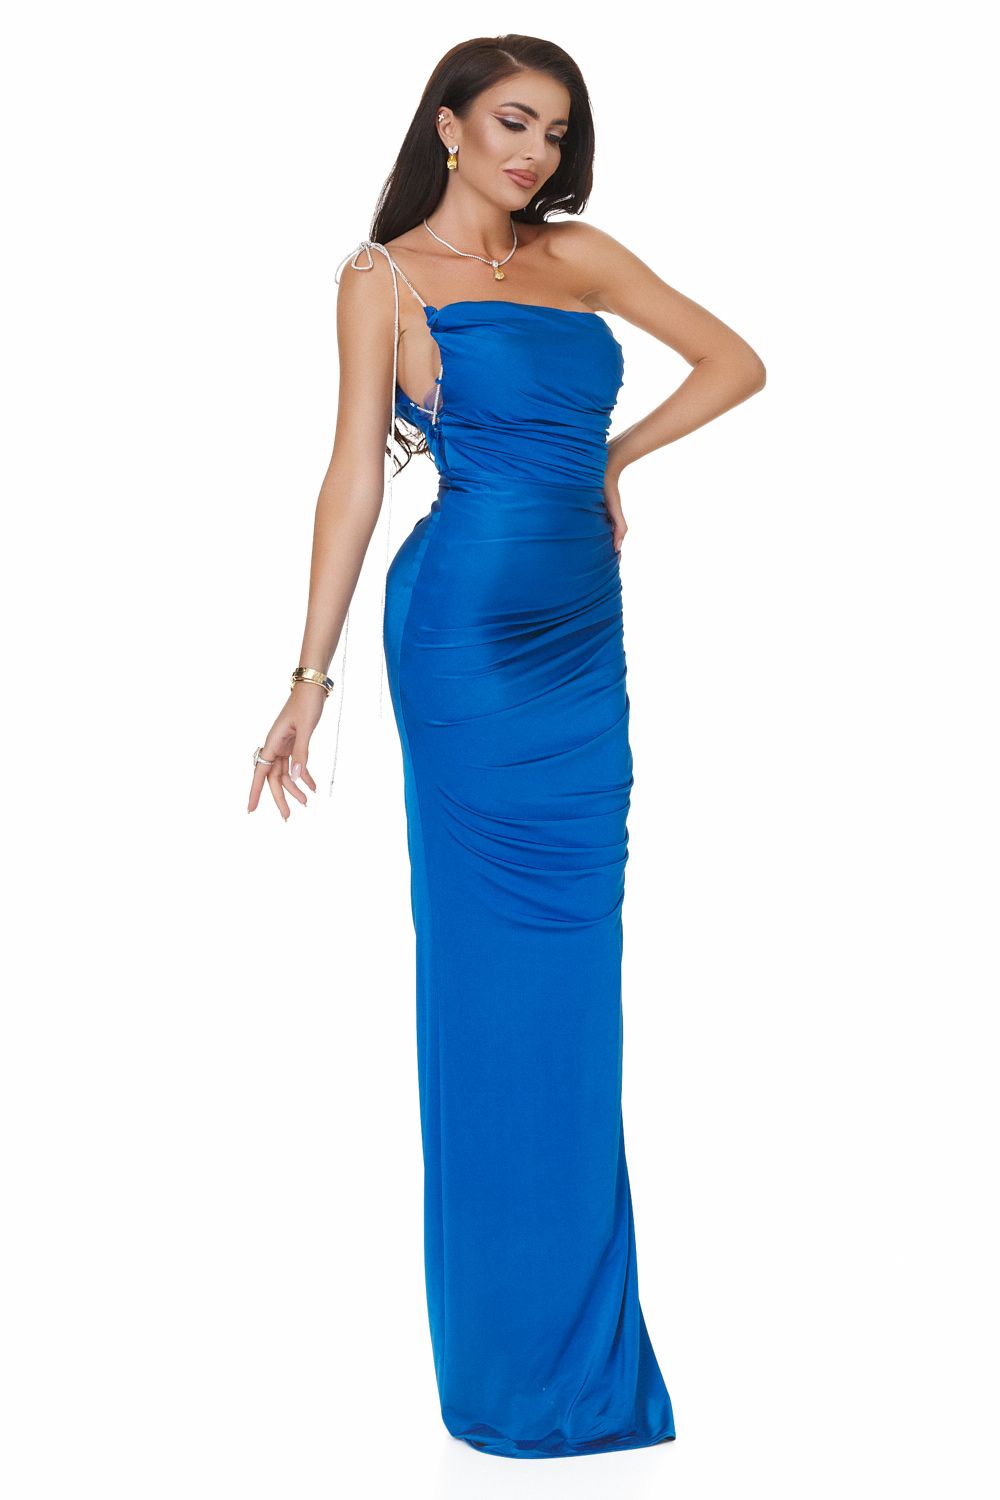 Gigasy Bogas long blue dress for ladies